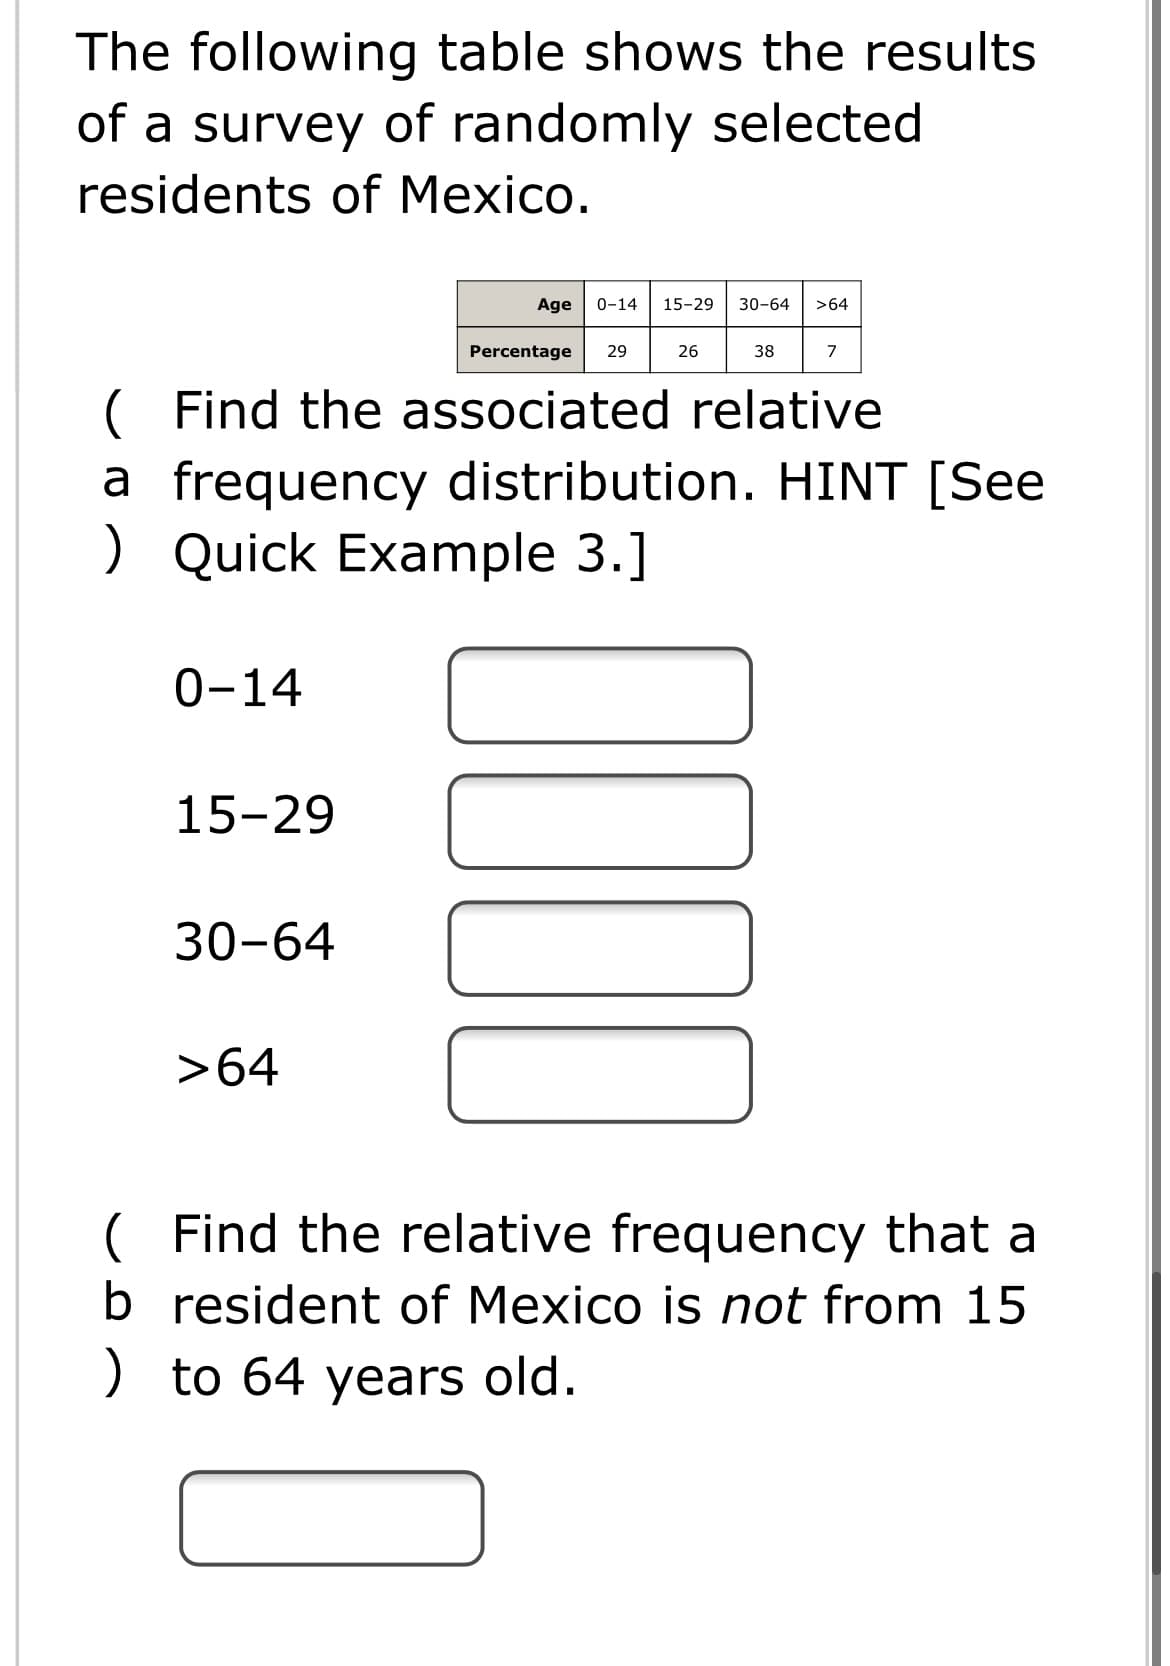 The following table shows the results
of a survey of randomly selected
residents of Mexico.
Age
0-14
15-29
30-64
>64
Percentage
29
26
38
7
( Find the associated relative
a frequency distribution. HINT [See
) Quick Example 3.]
0-14
15-29
30-64
>64
( Find the relative frequency that a
b resident of Mexico is not from 15
) to 64 years old.
